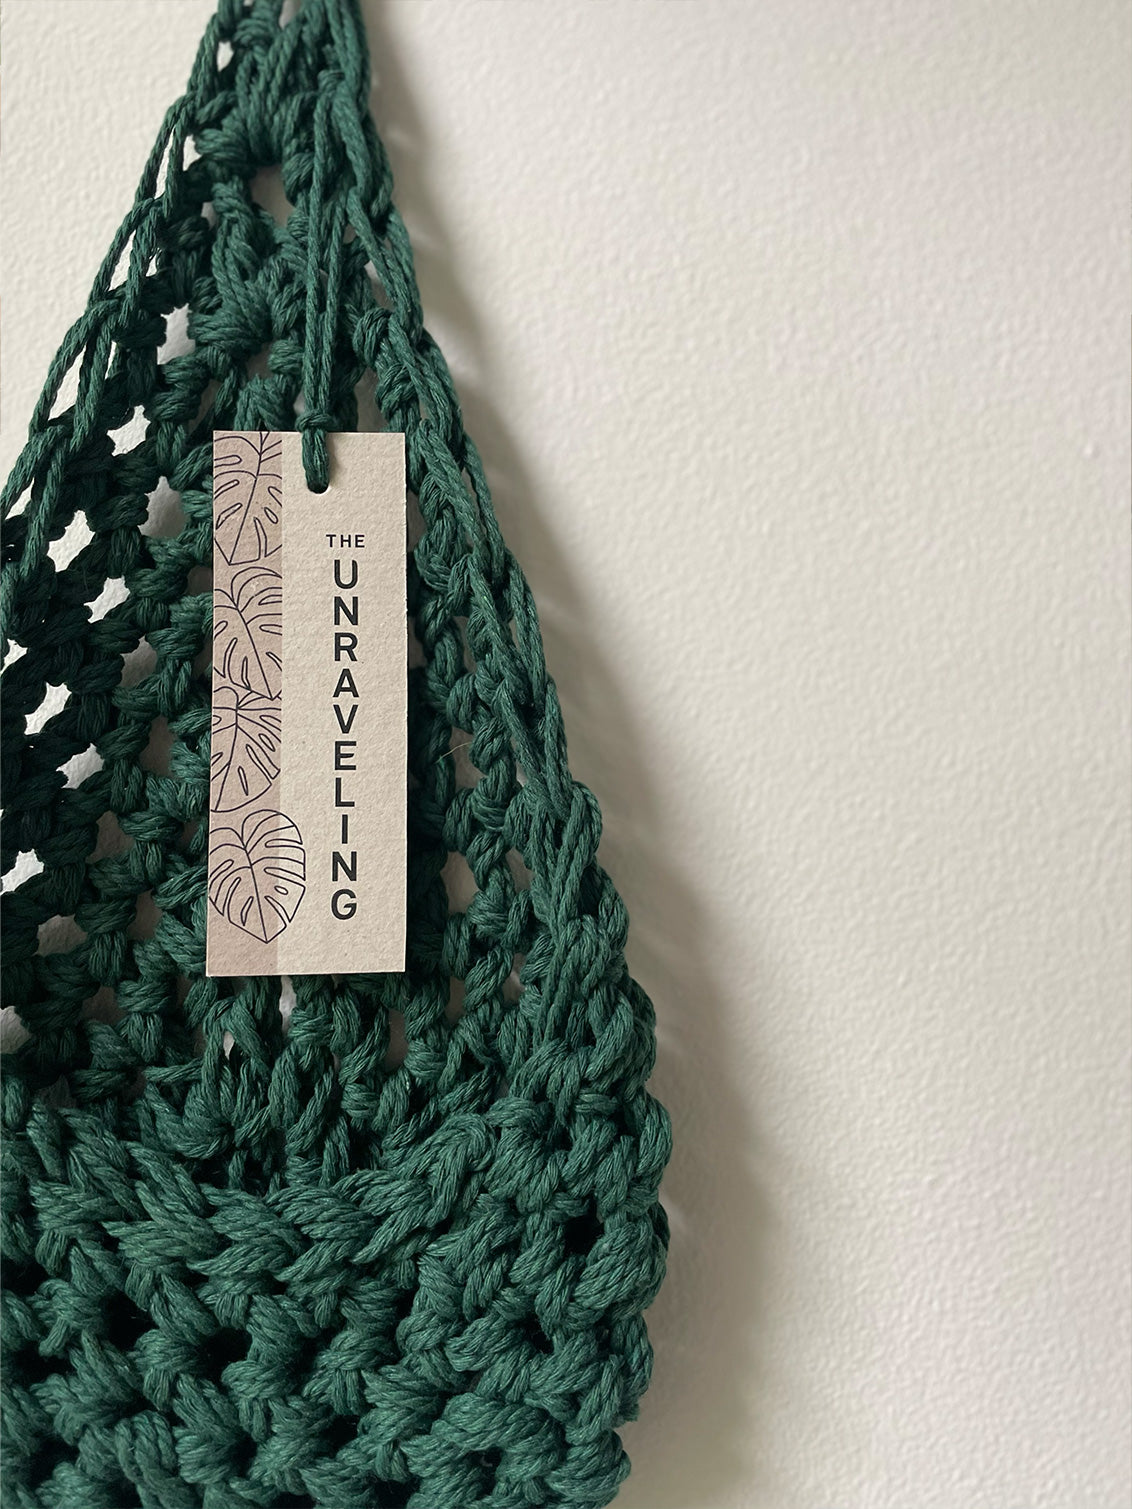 Image showing handmade green cotton planter hanging against a white wall with swing tag attached showing brand name, The Unraveling, Planter is flat to show the tierdrop shape before adding pot and plant.